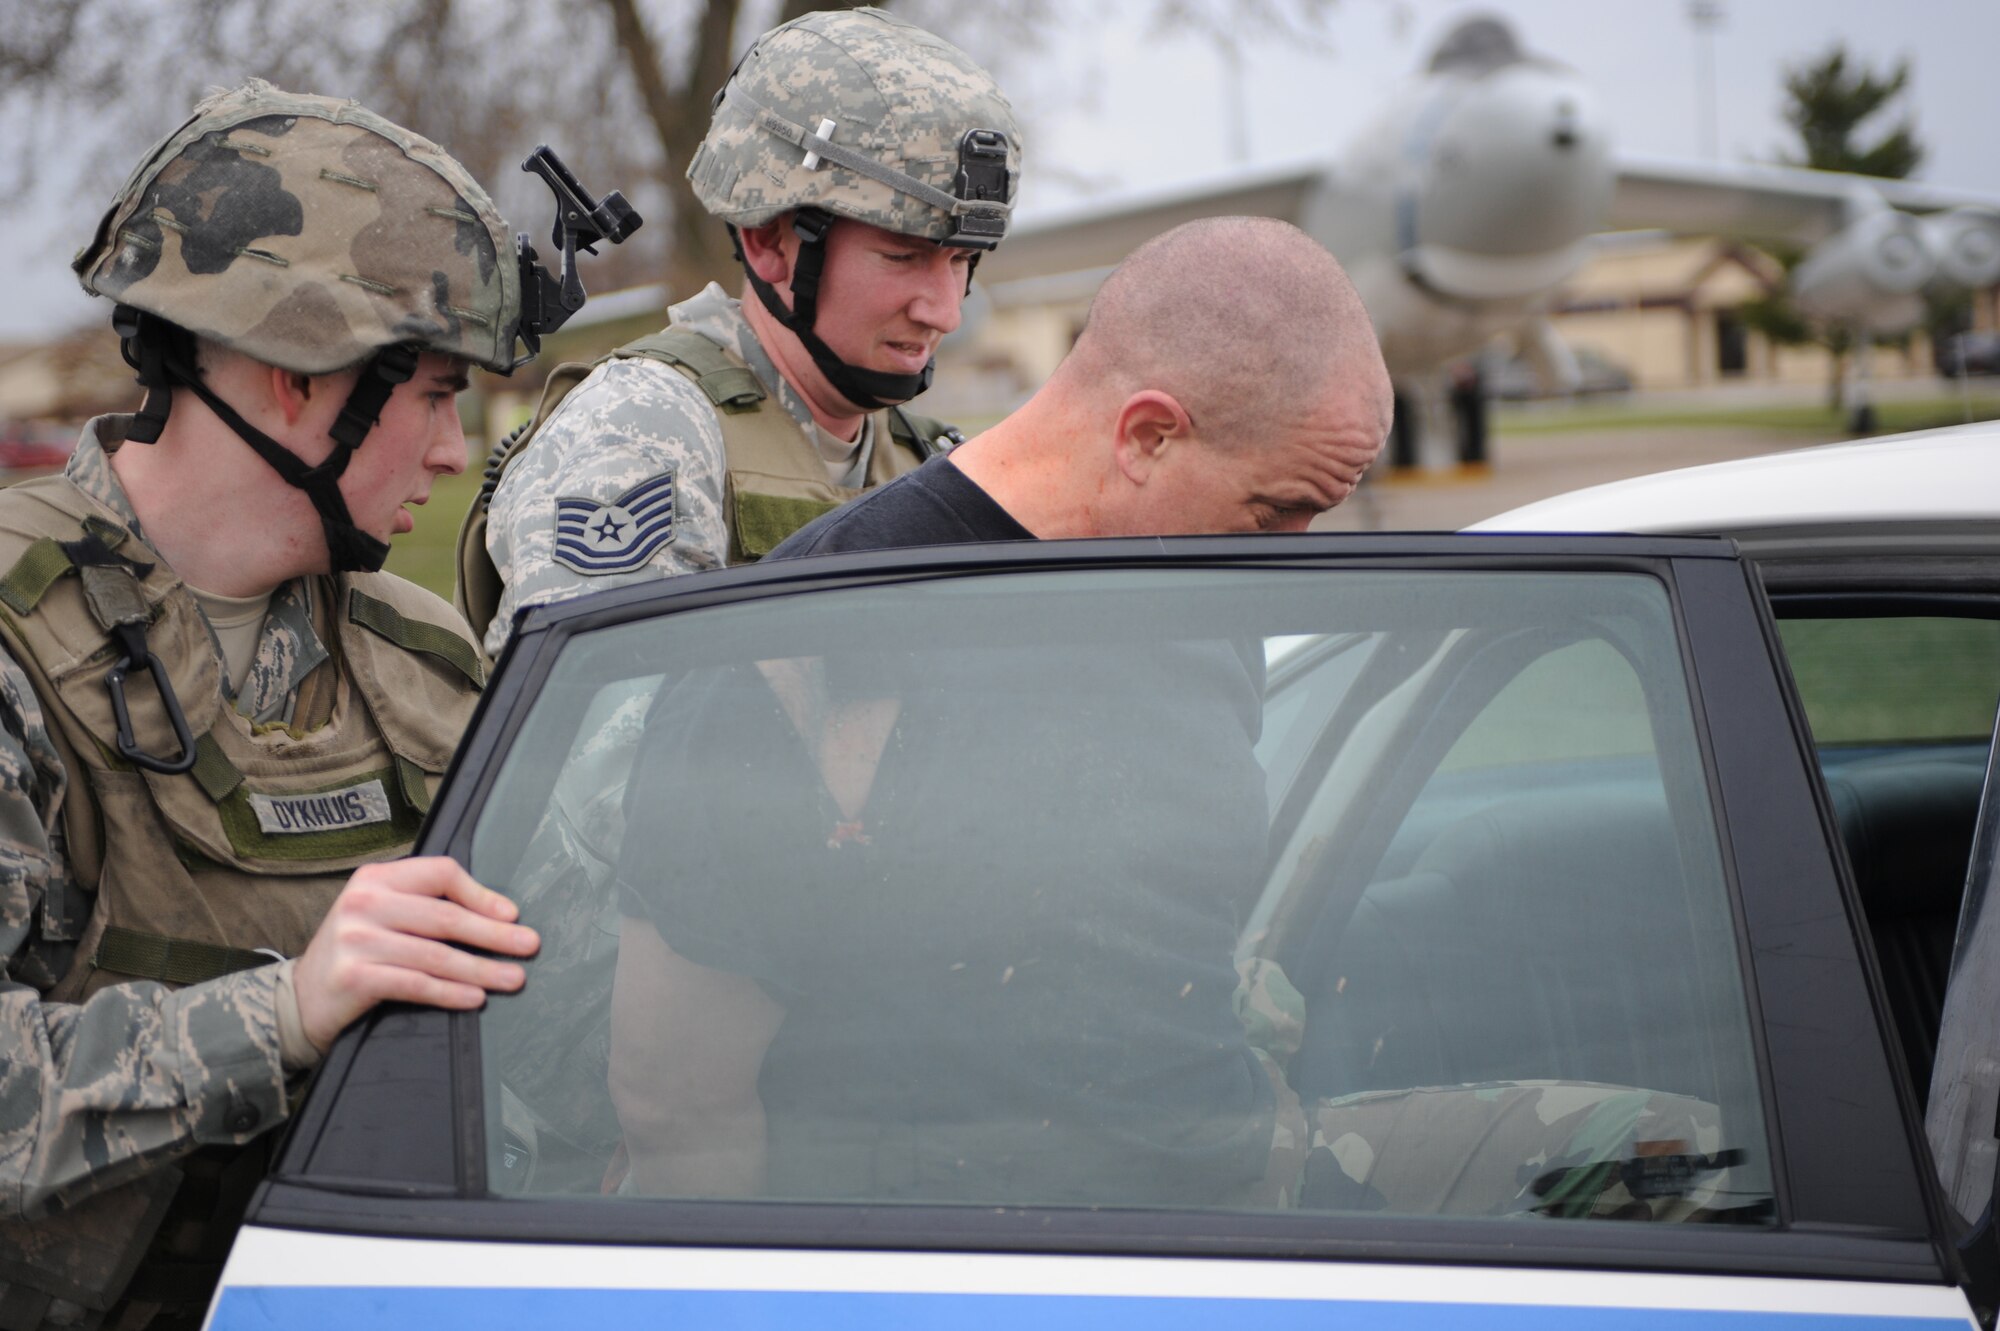 WHITEMAN AIR FORCE BASE, Mo., -- Senior Airman Anthony Dykhuis and Tech. Sgt. Jonathon Huber, 509th Security Forces Squadron, put Lt. Col. Daniel Semsel, 509th Mission Support Squadron deputy commander, into the back of the squad car after being apprehended during the active shooter exercise here March 24, 2010. The 509th SFS, and many others throughout the Air Force are training to deal with these types of threats from within. Hoping to reduce the number of casualties if such situations occur, a quick and effective response was the goal of the training exercise. (U.S. Air Force photo/Staff Sgt. Jason Huddleston)  (Released)